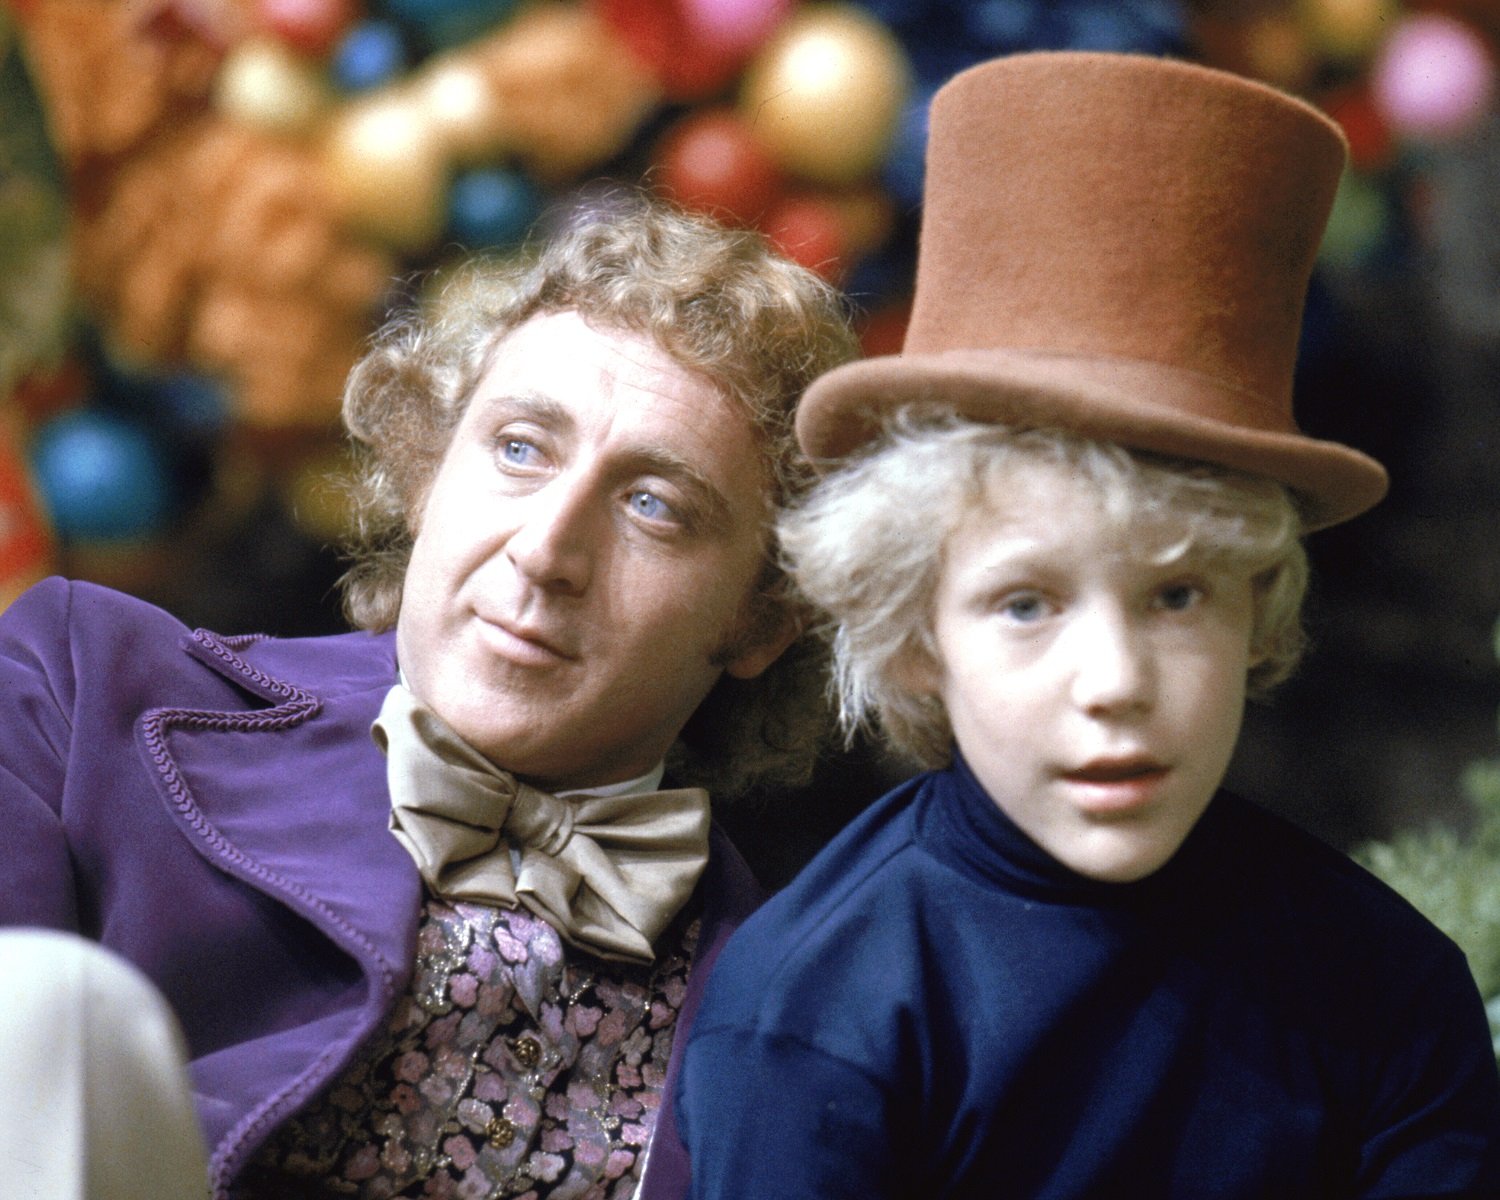 Gene Wilder as Willy Wonka and Peter Ostrum as Charlie Bucket on the set of the fantasy film Willy Wonka & the Chocolate Factory